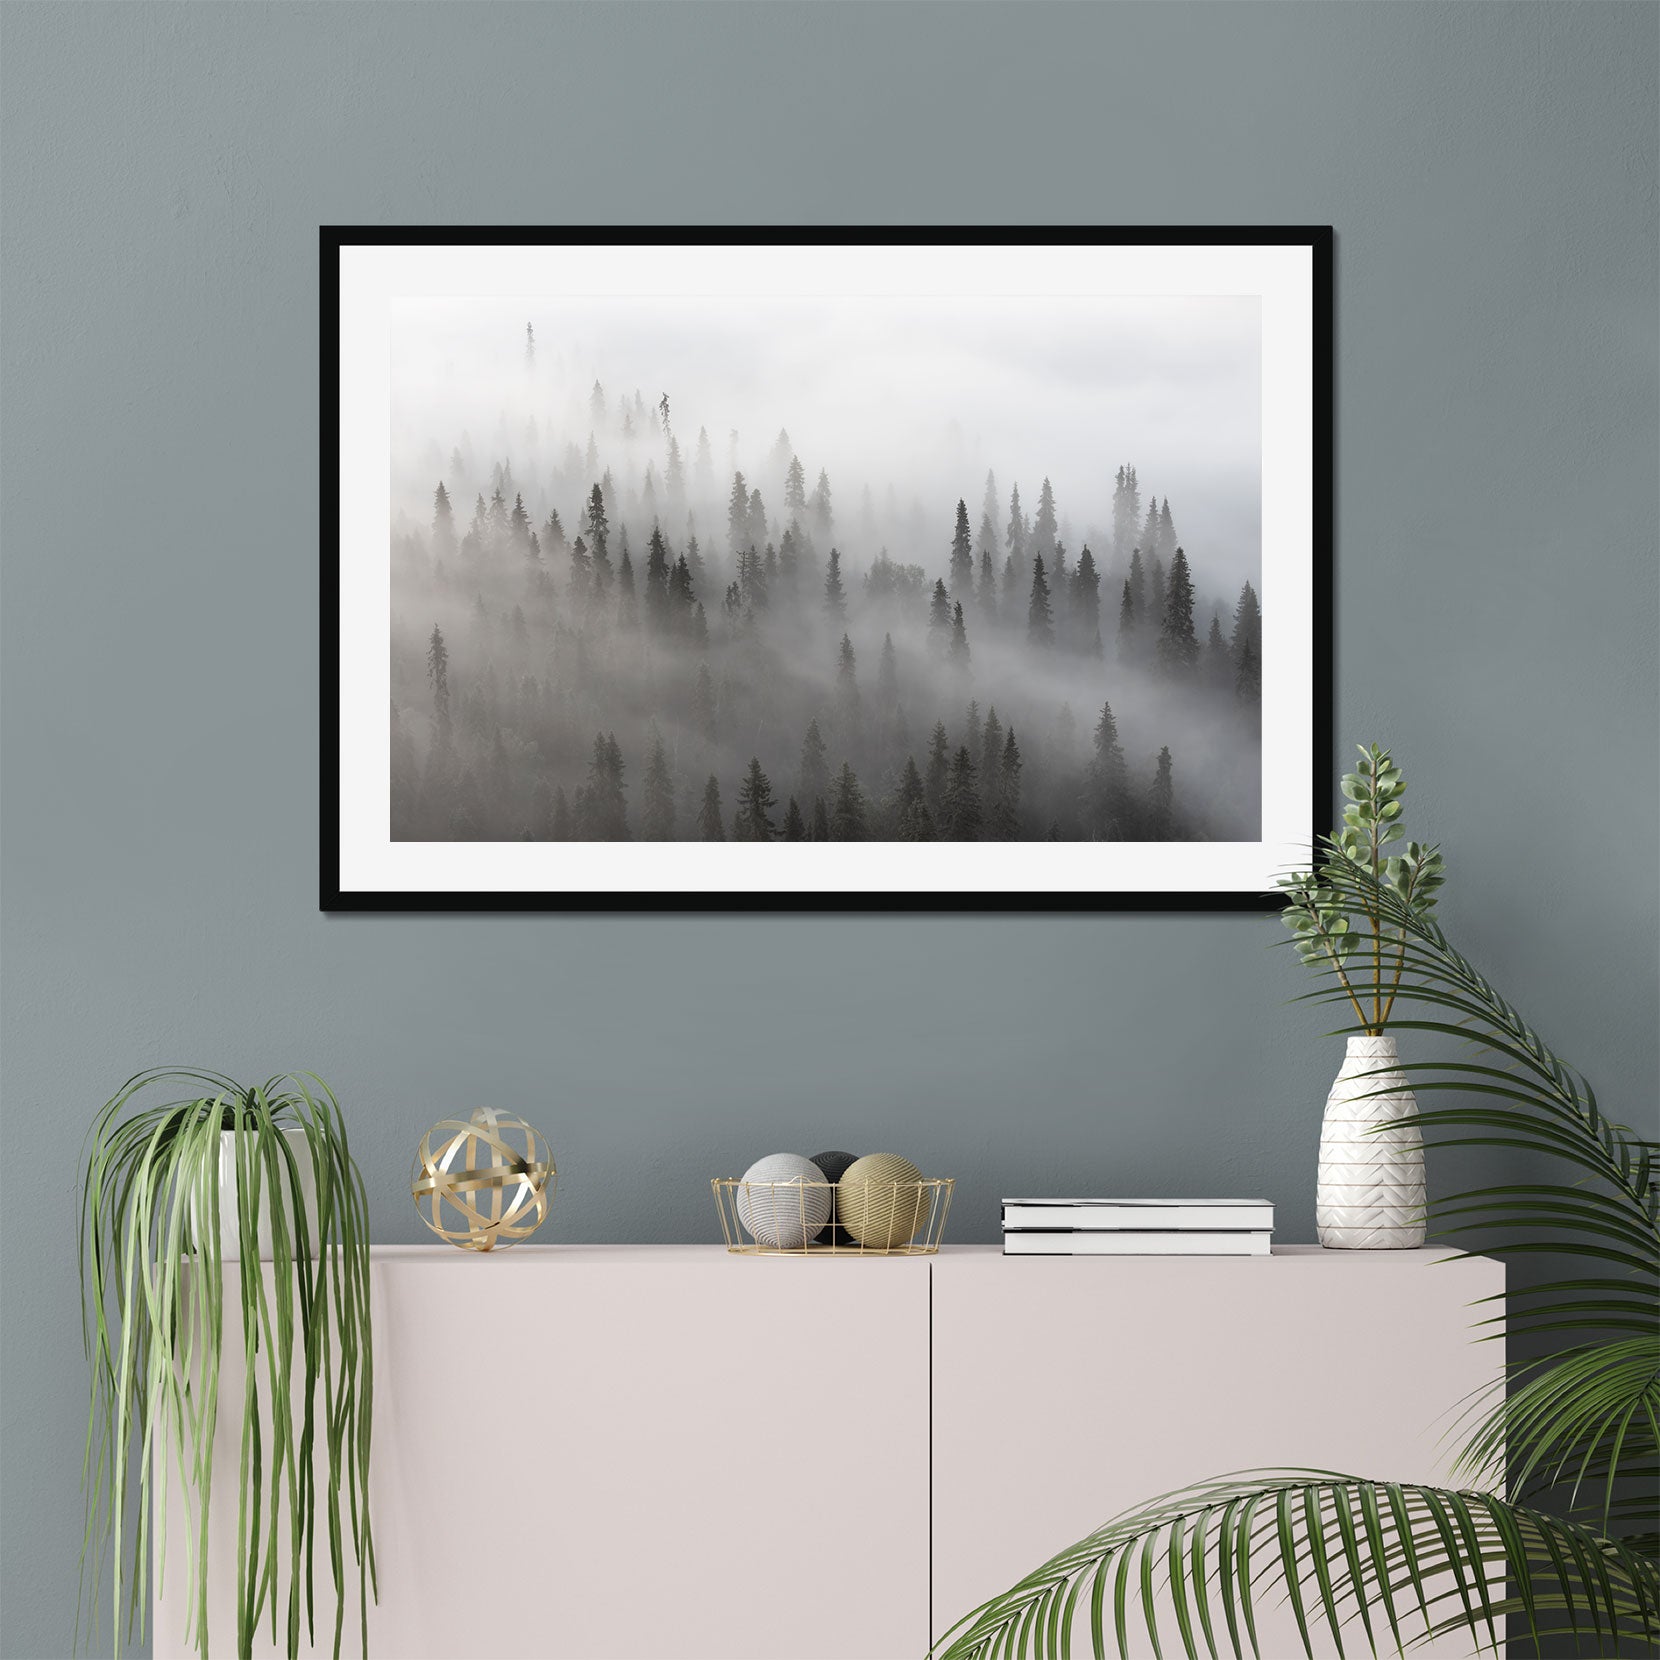 A framed print of a forest with lingering fog